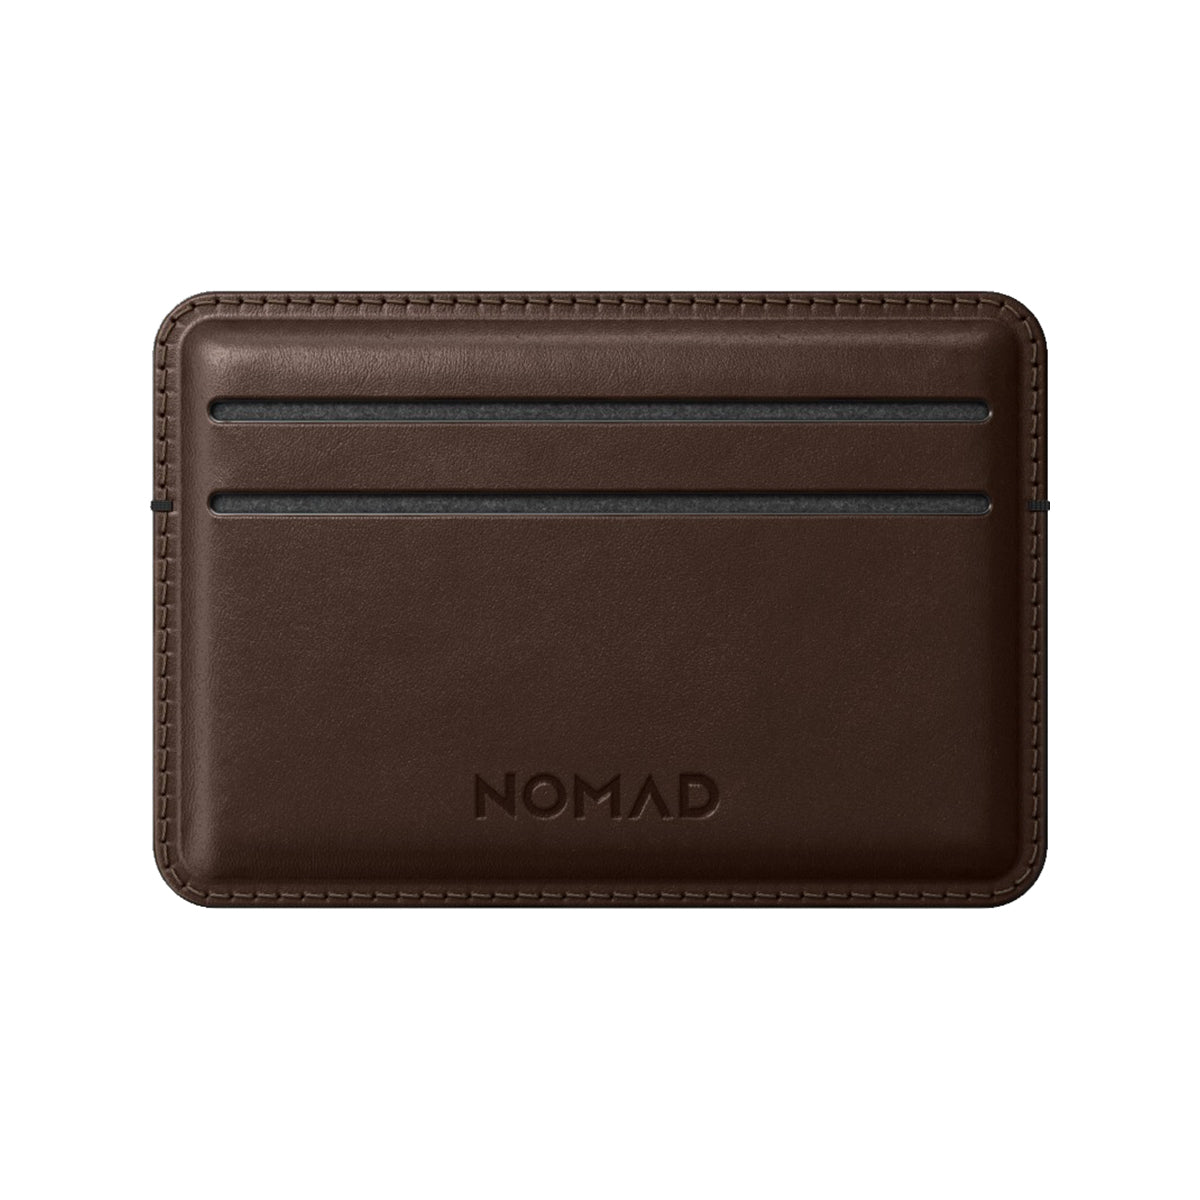 NOMAD Card Wallet - Rustic Brown Horween Leather.